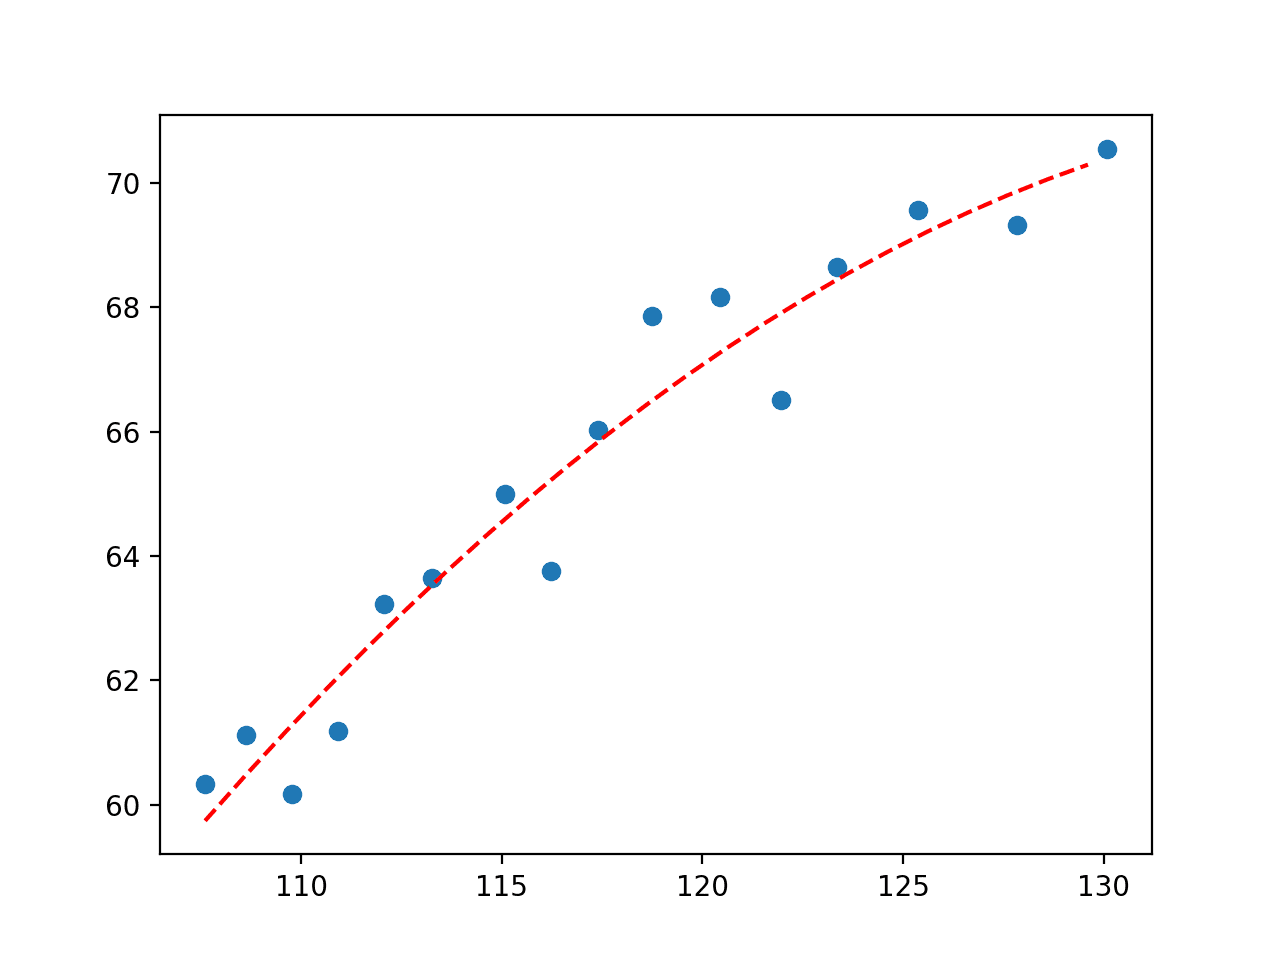 Plot of Second Degree Polynomial Fit to Economic Dataset